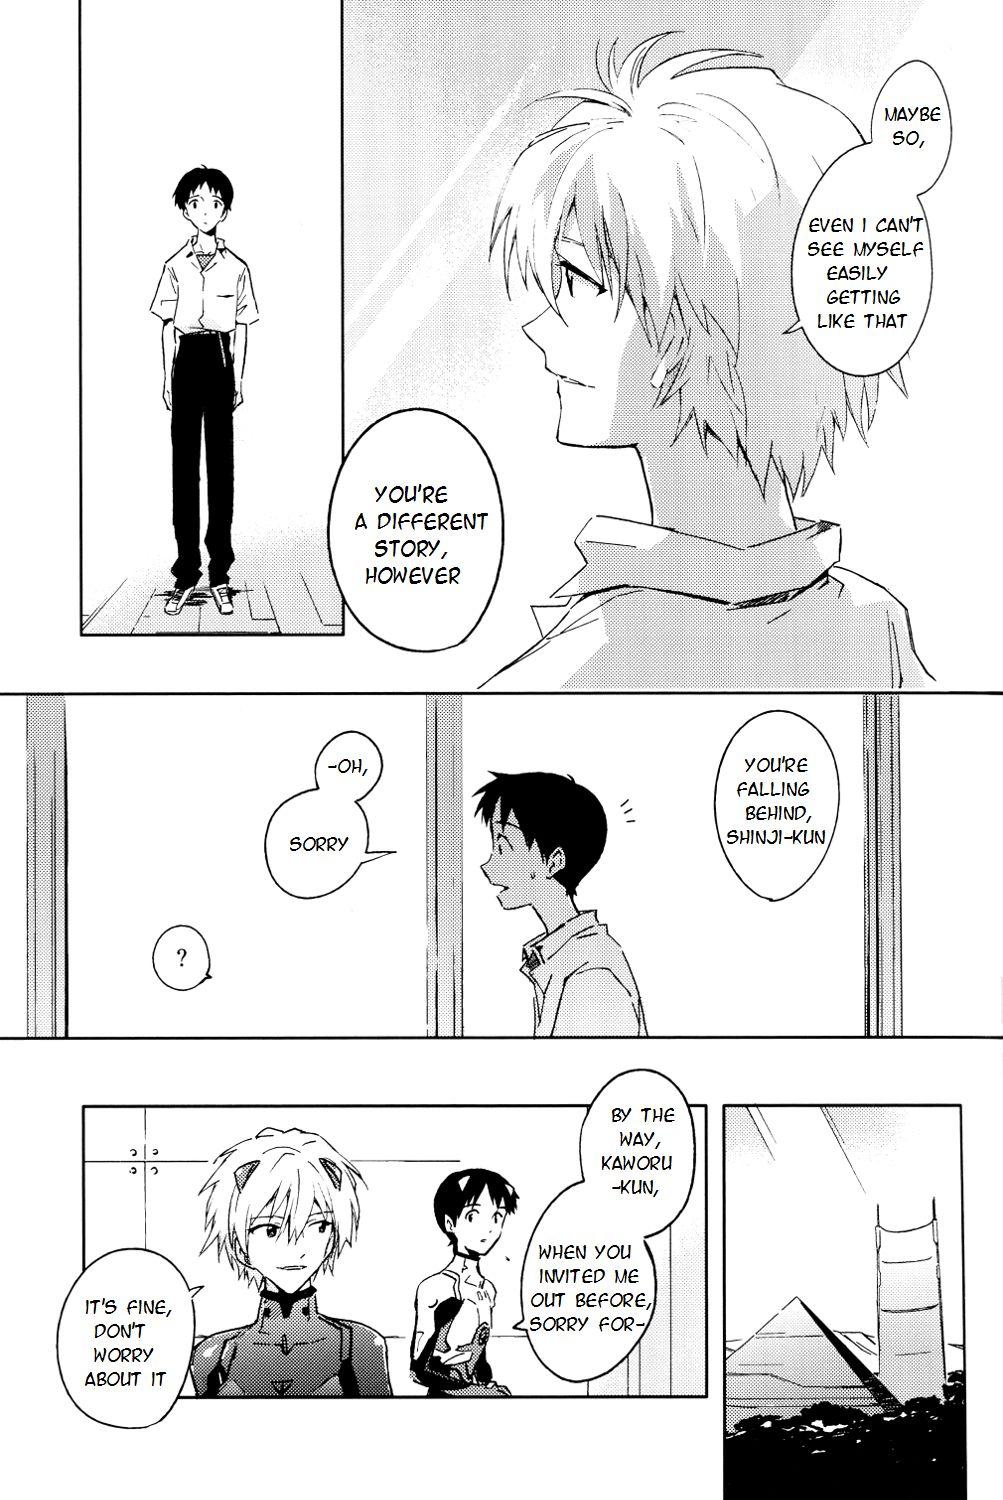 Massages FLY ME TO THE MOON - Neon genesis evangelion And - Page 9